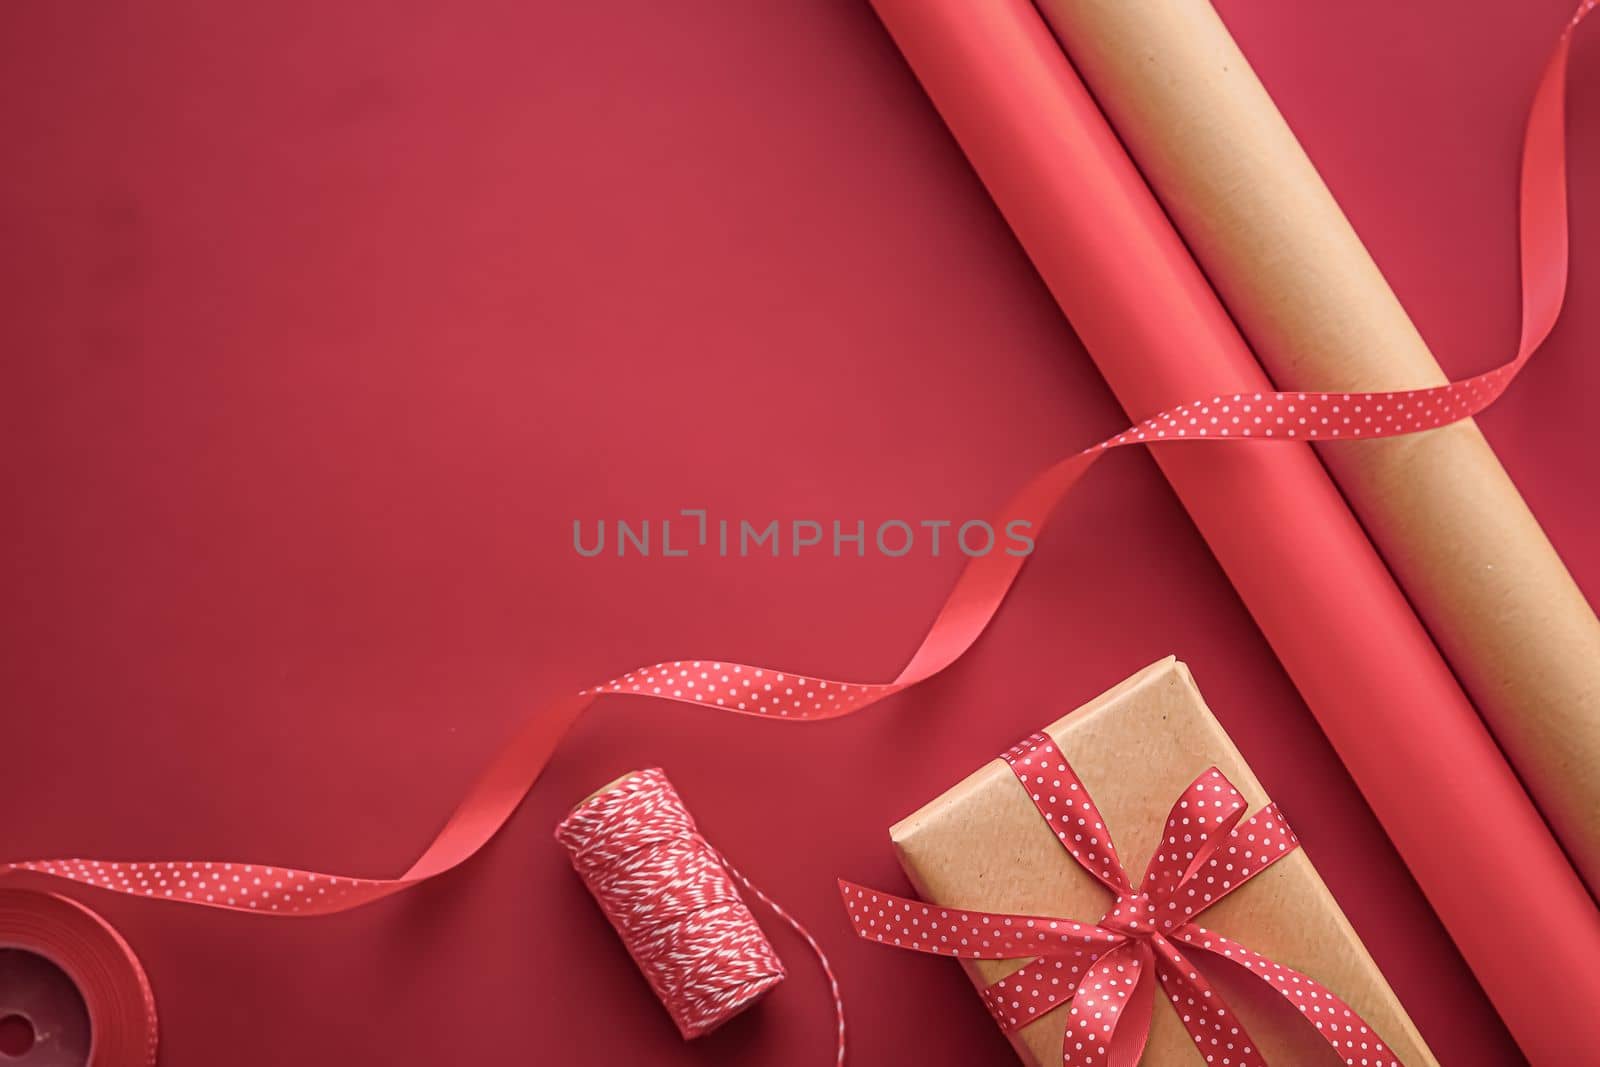 Gifts preparation, birthday and holidays gift giving, craft paper and ribbons for gift boxes on coral background as wrapping tools and decorations, diy presents as holiday flat lay design by Anneleven